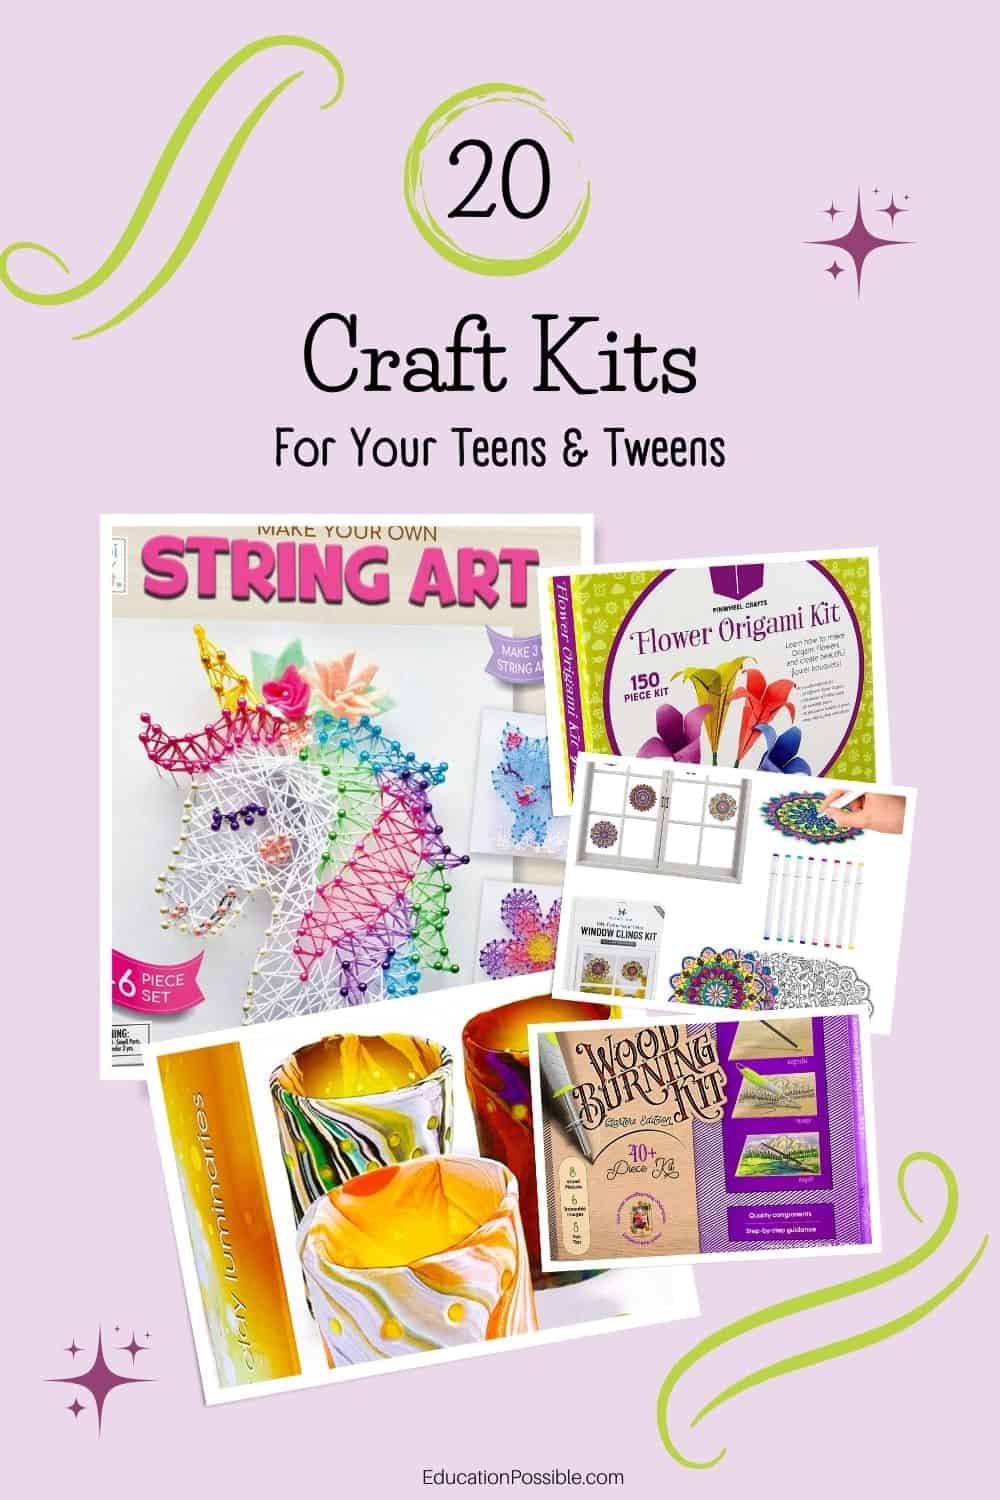 5 images fanned out of different craft kits for kids.